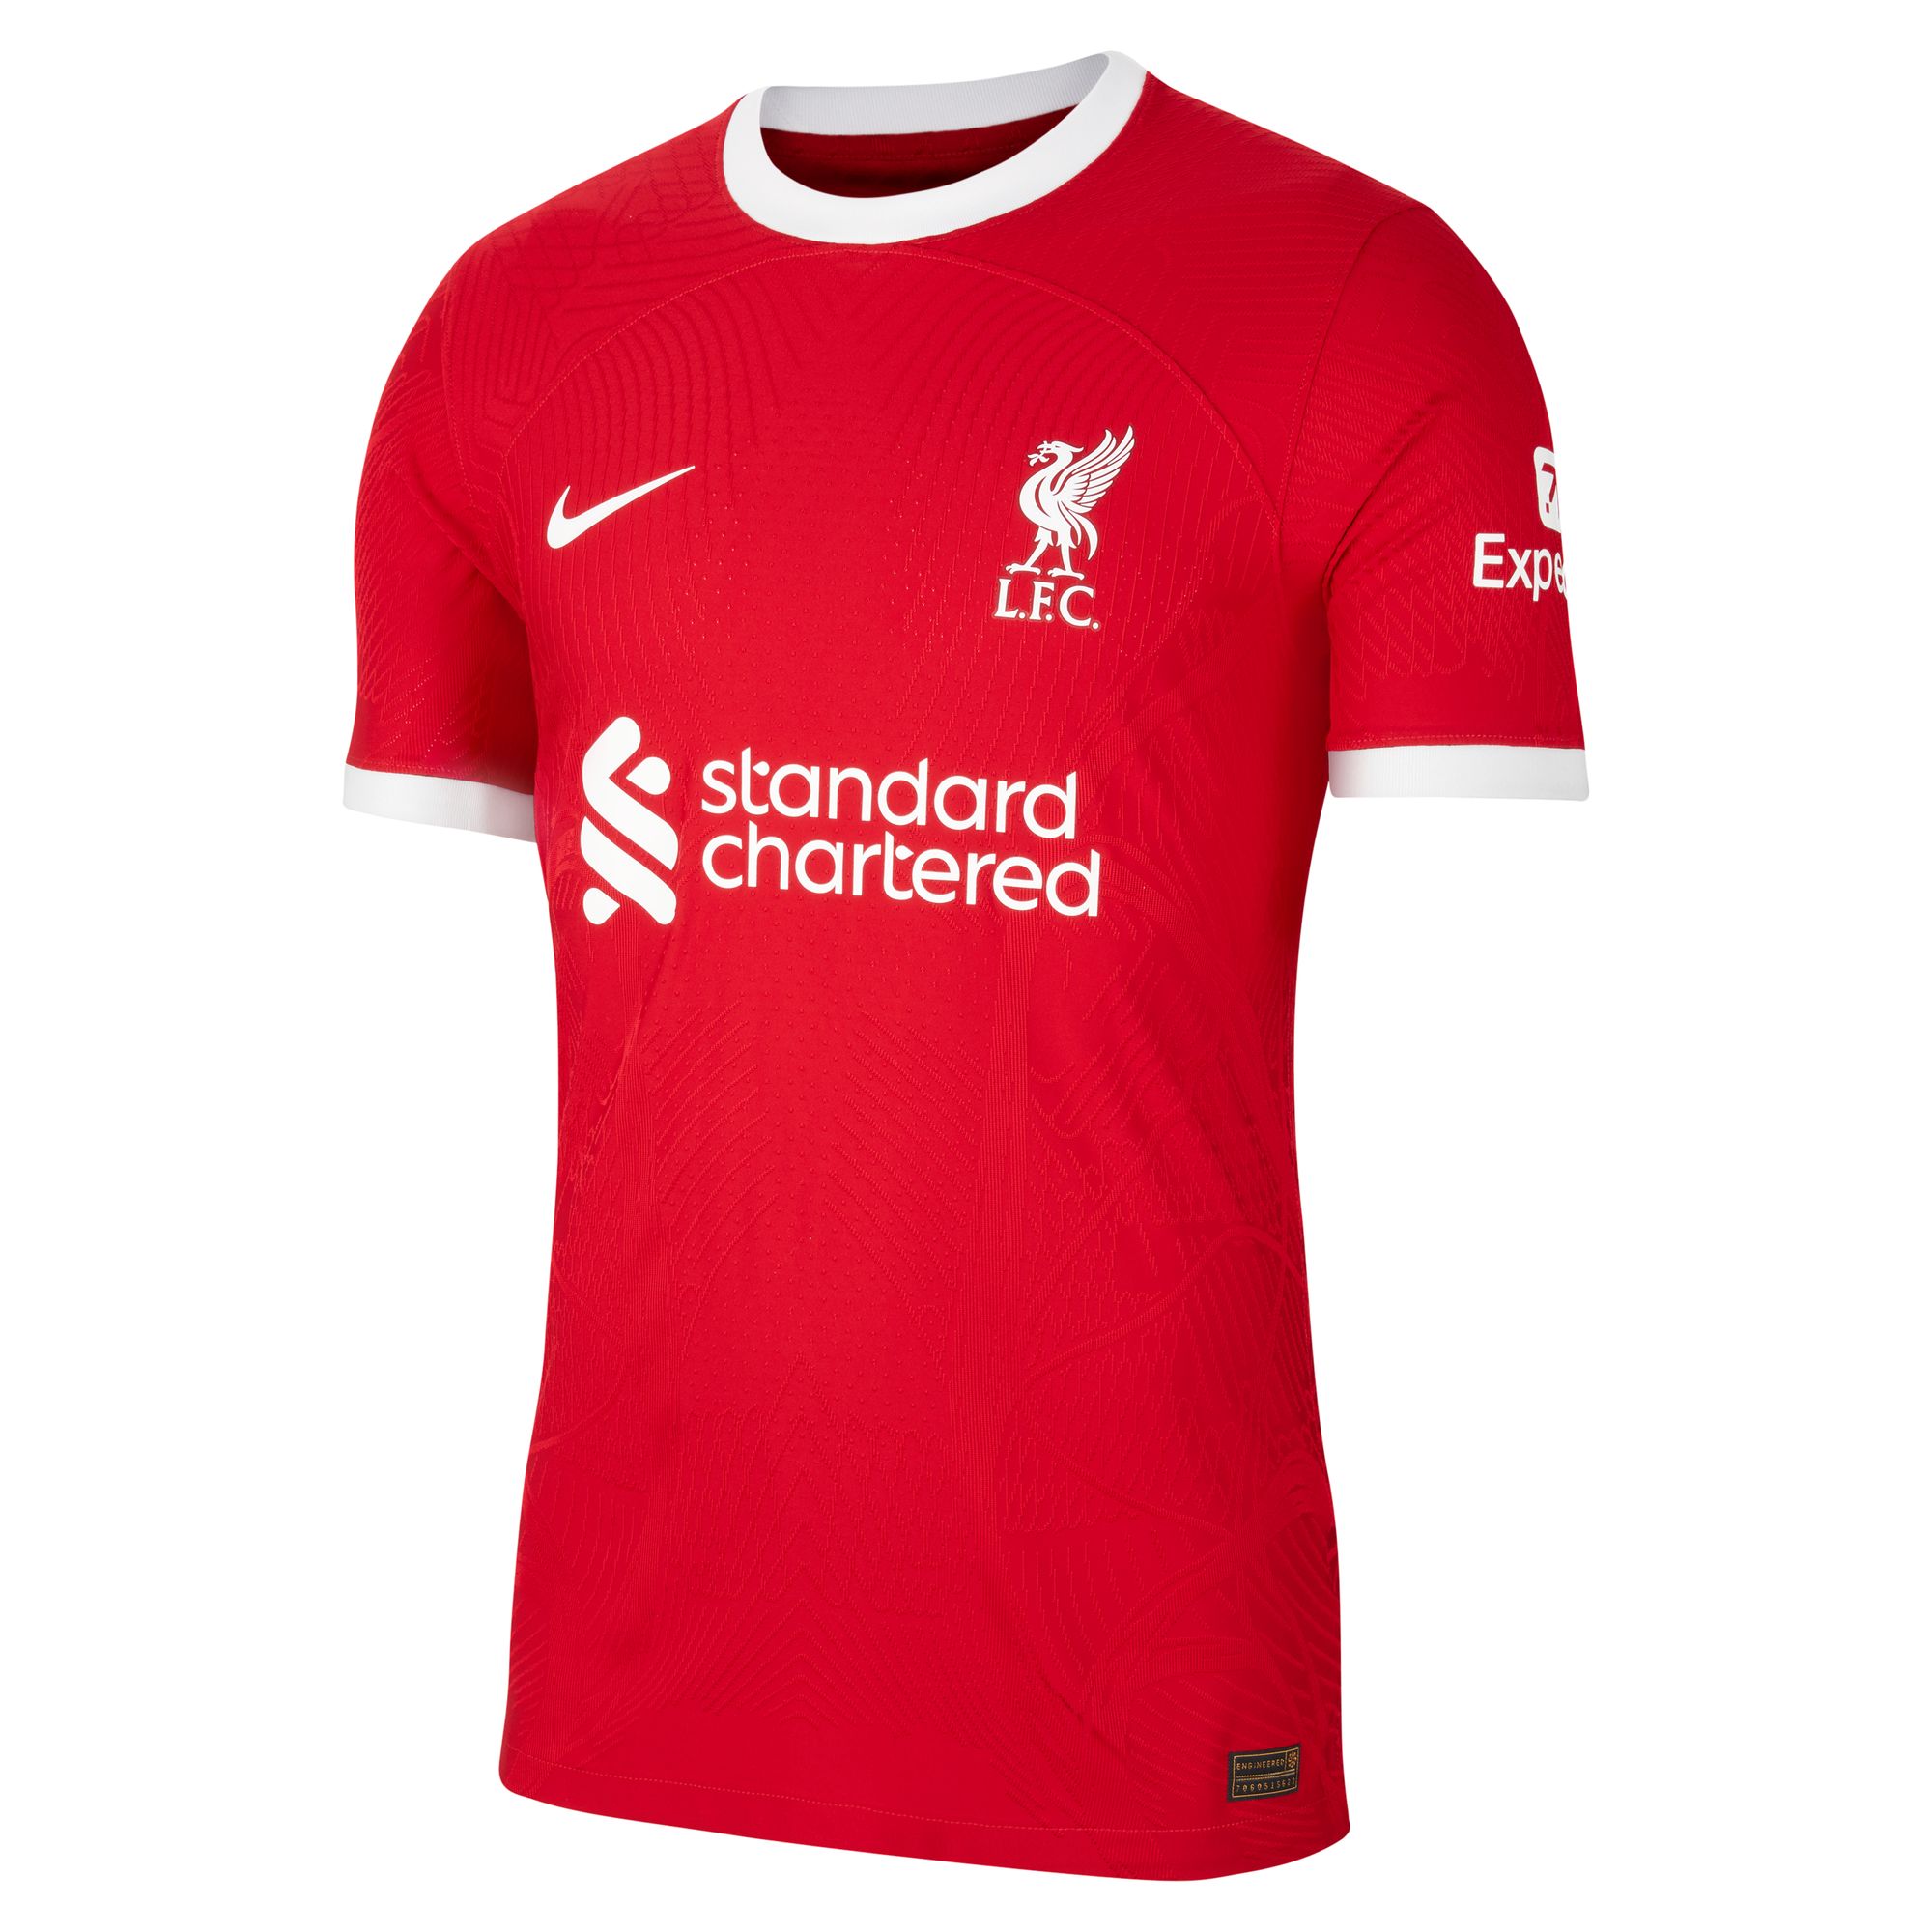  Nike Men's Soccer Liverpool Home Jersey (Small) Red